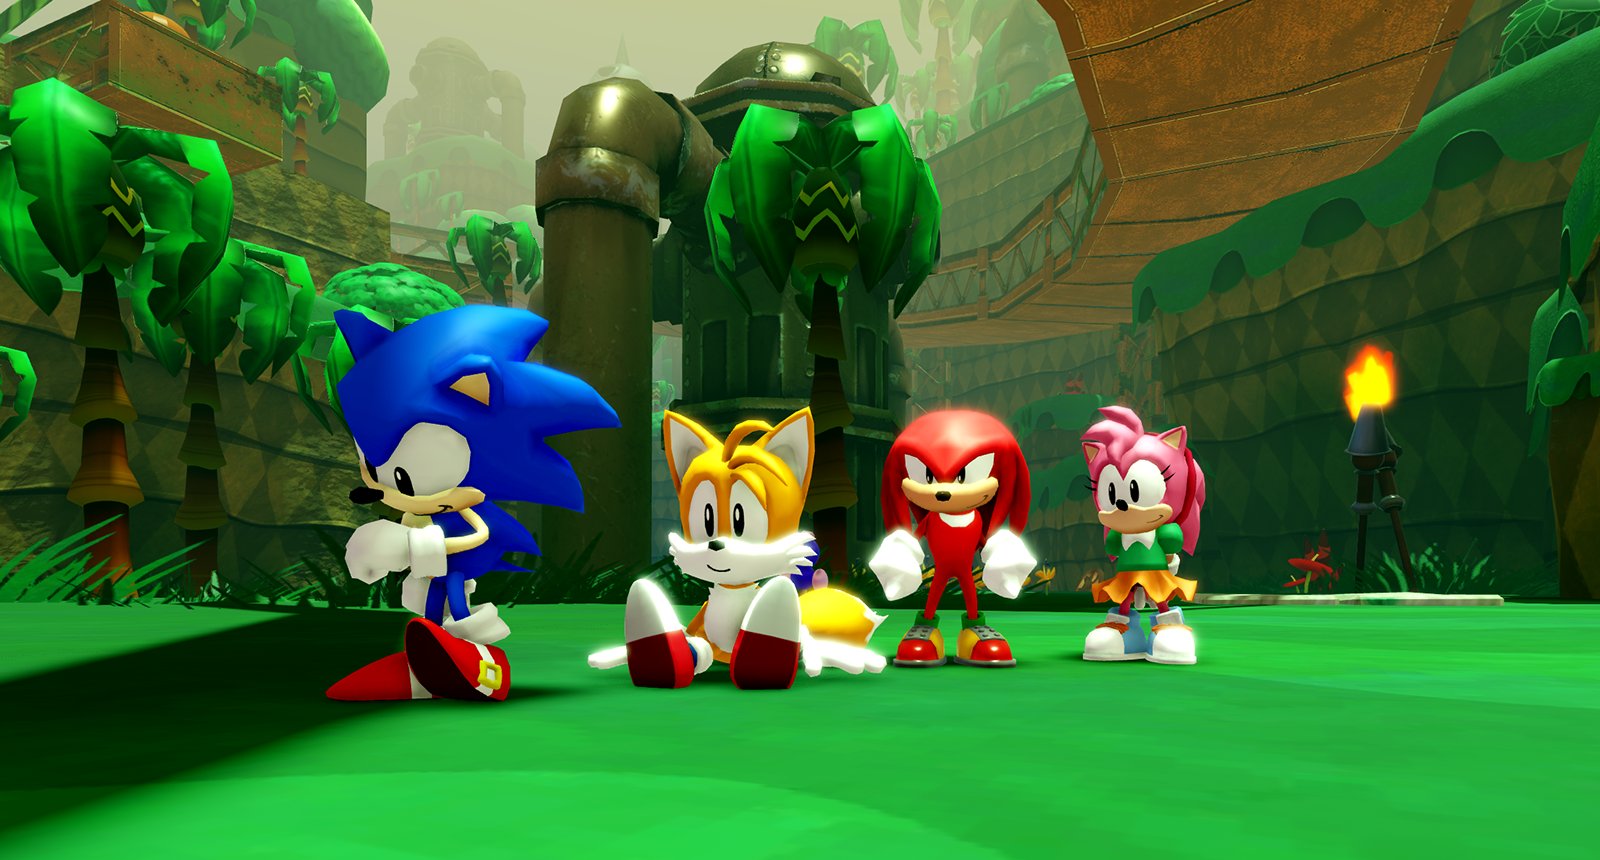 Sonic Speed Simulator announced: a new official Sonic game